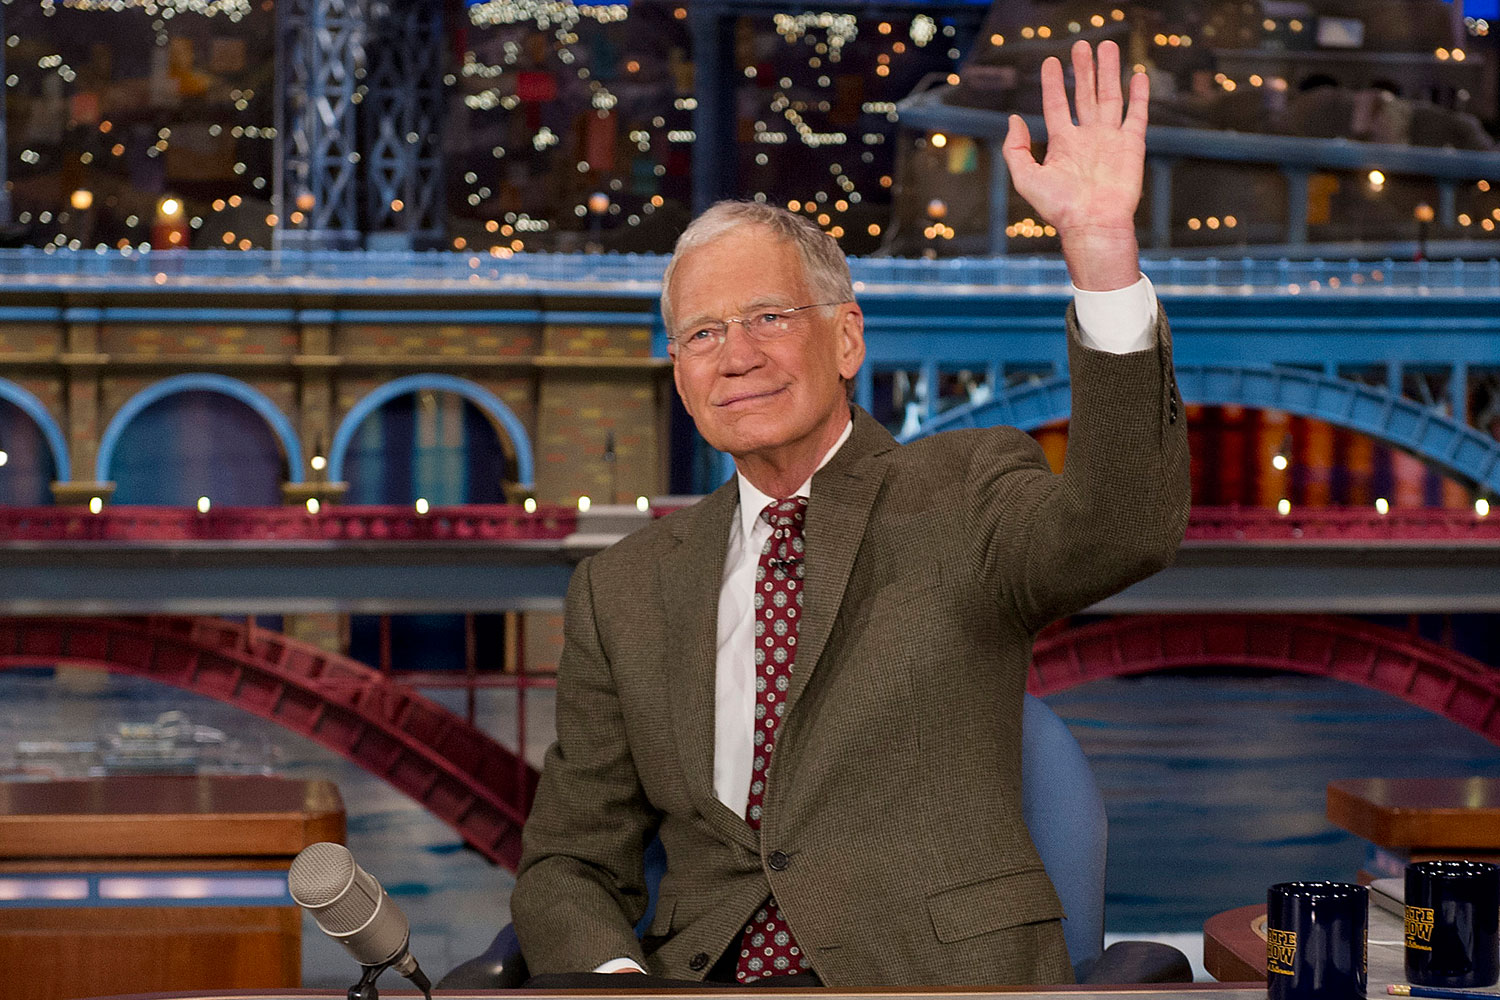 In this photo provided by CBS, David Letterman, host of the “Late Show with David Letterman,” waves to the audience in New York on Thursday, April 3, 2014, after announcing that he will retire sometime in 2015. (Jeffrey R. Staab—CBS/AP)